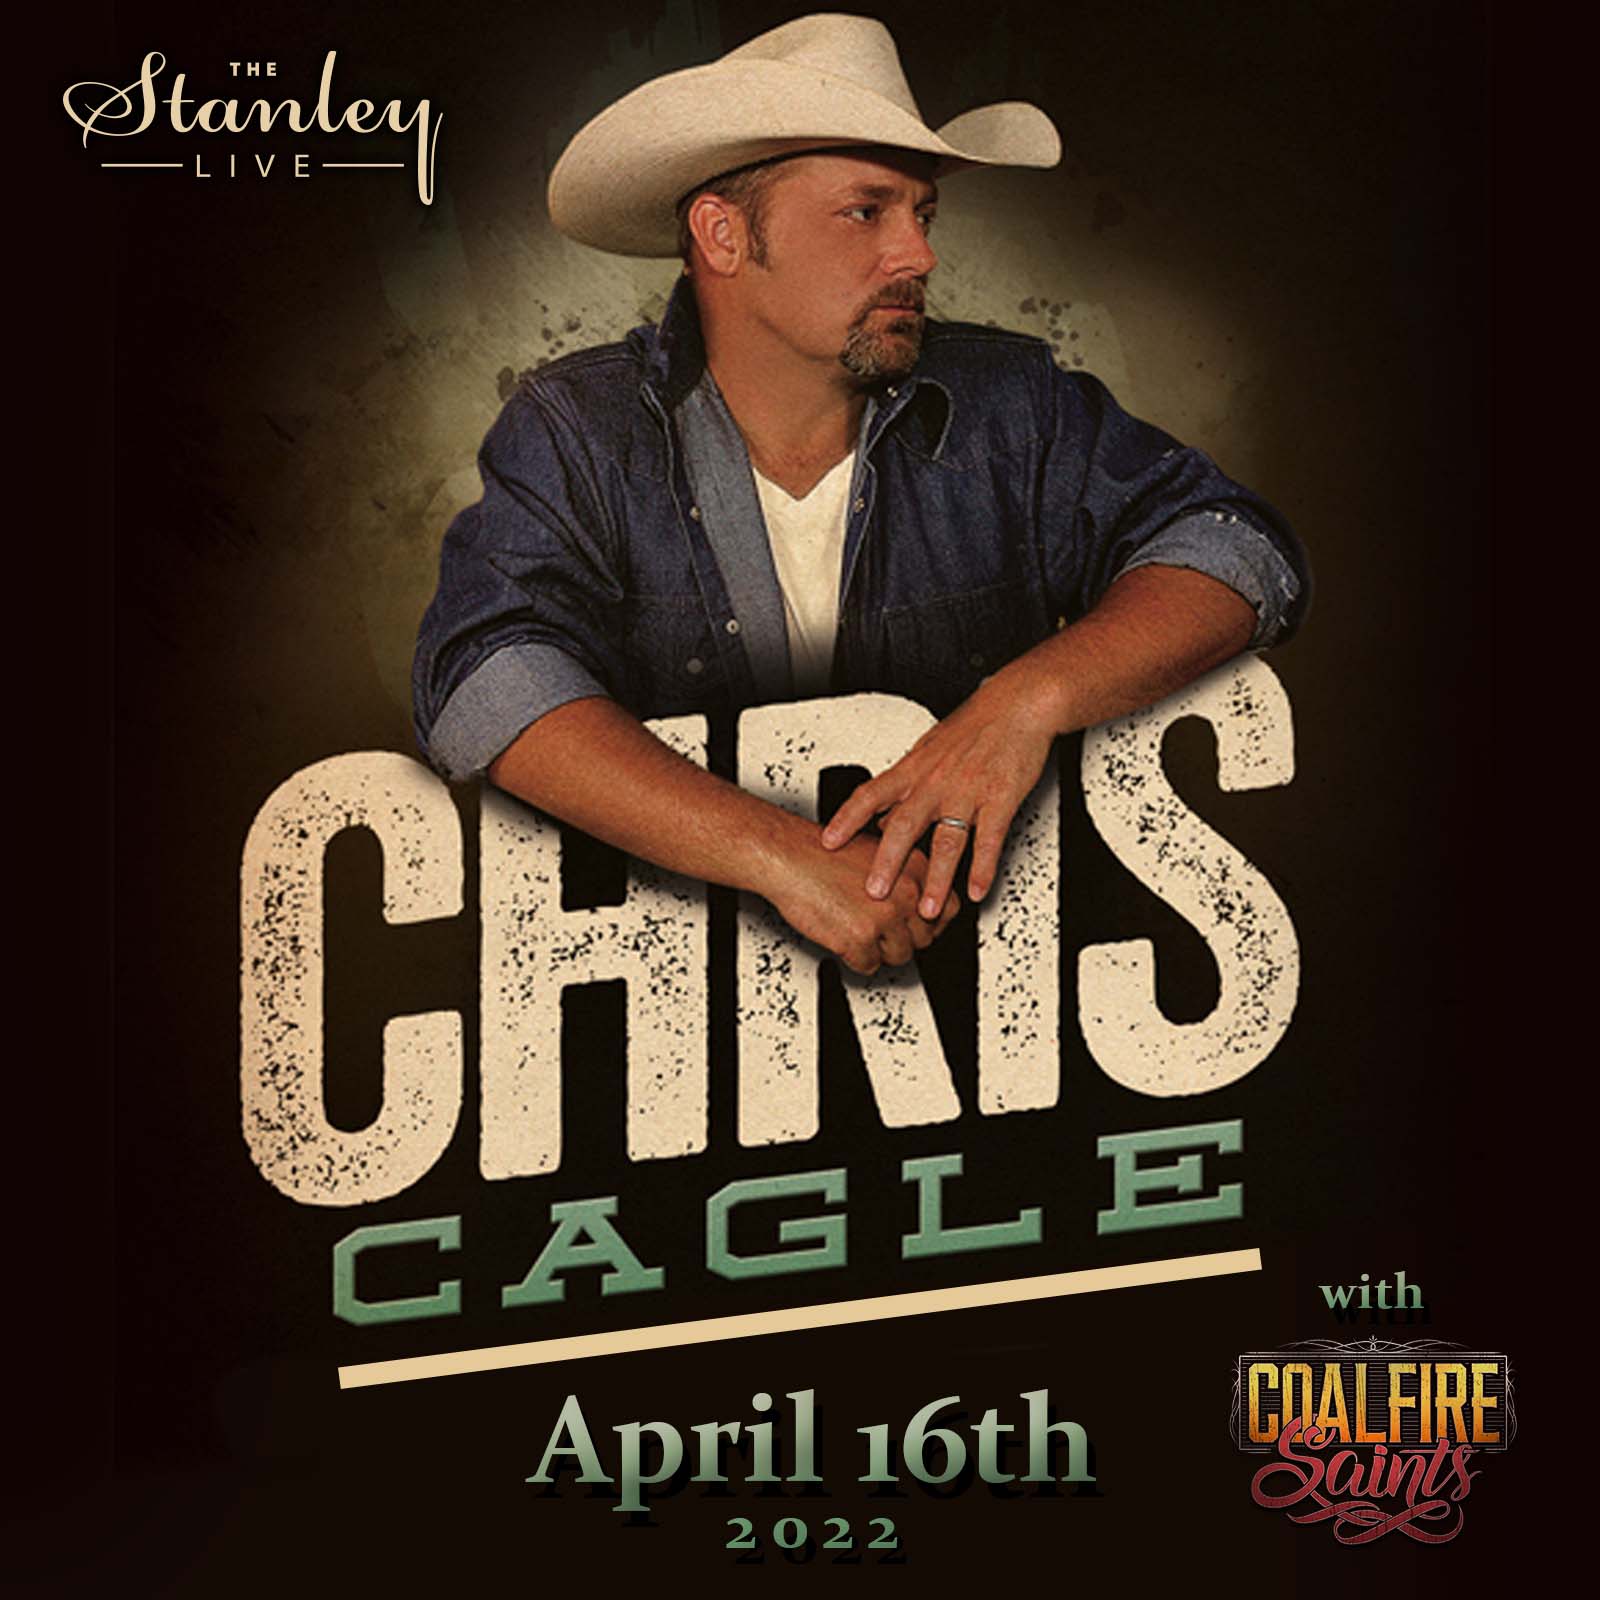 Chris Cagle Tickets at The Stanley Hotel Concert Hall in Estes Park by